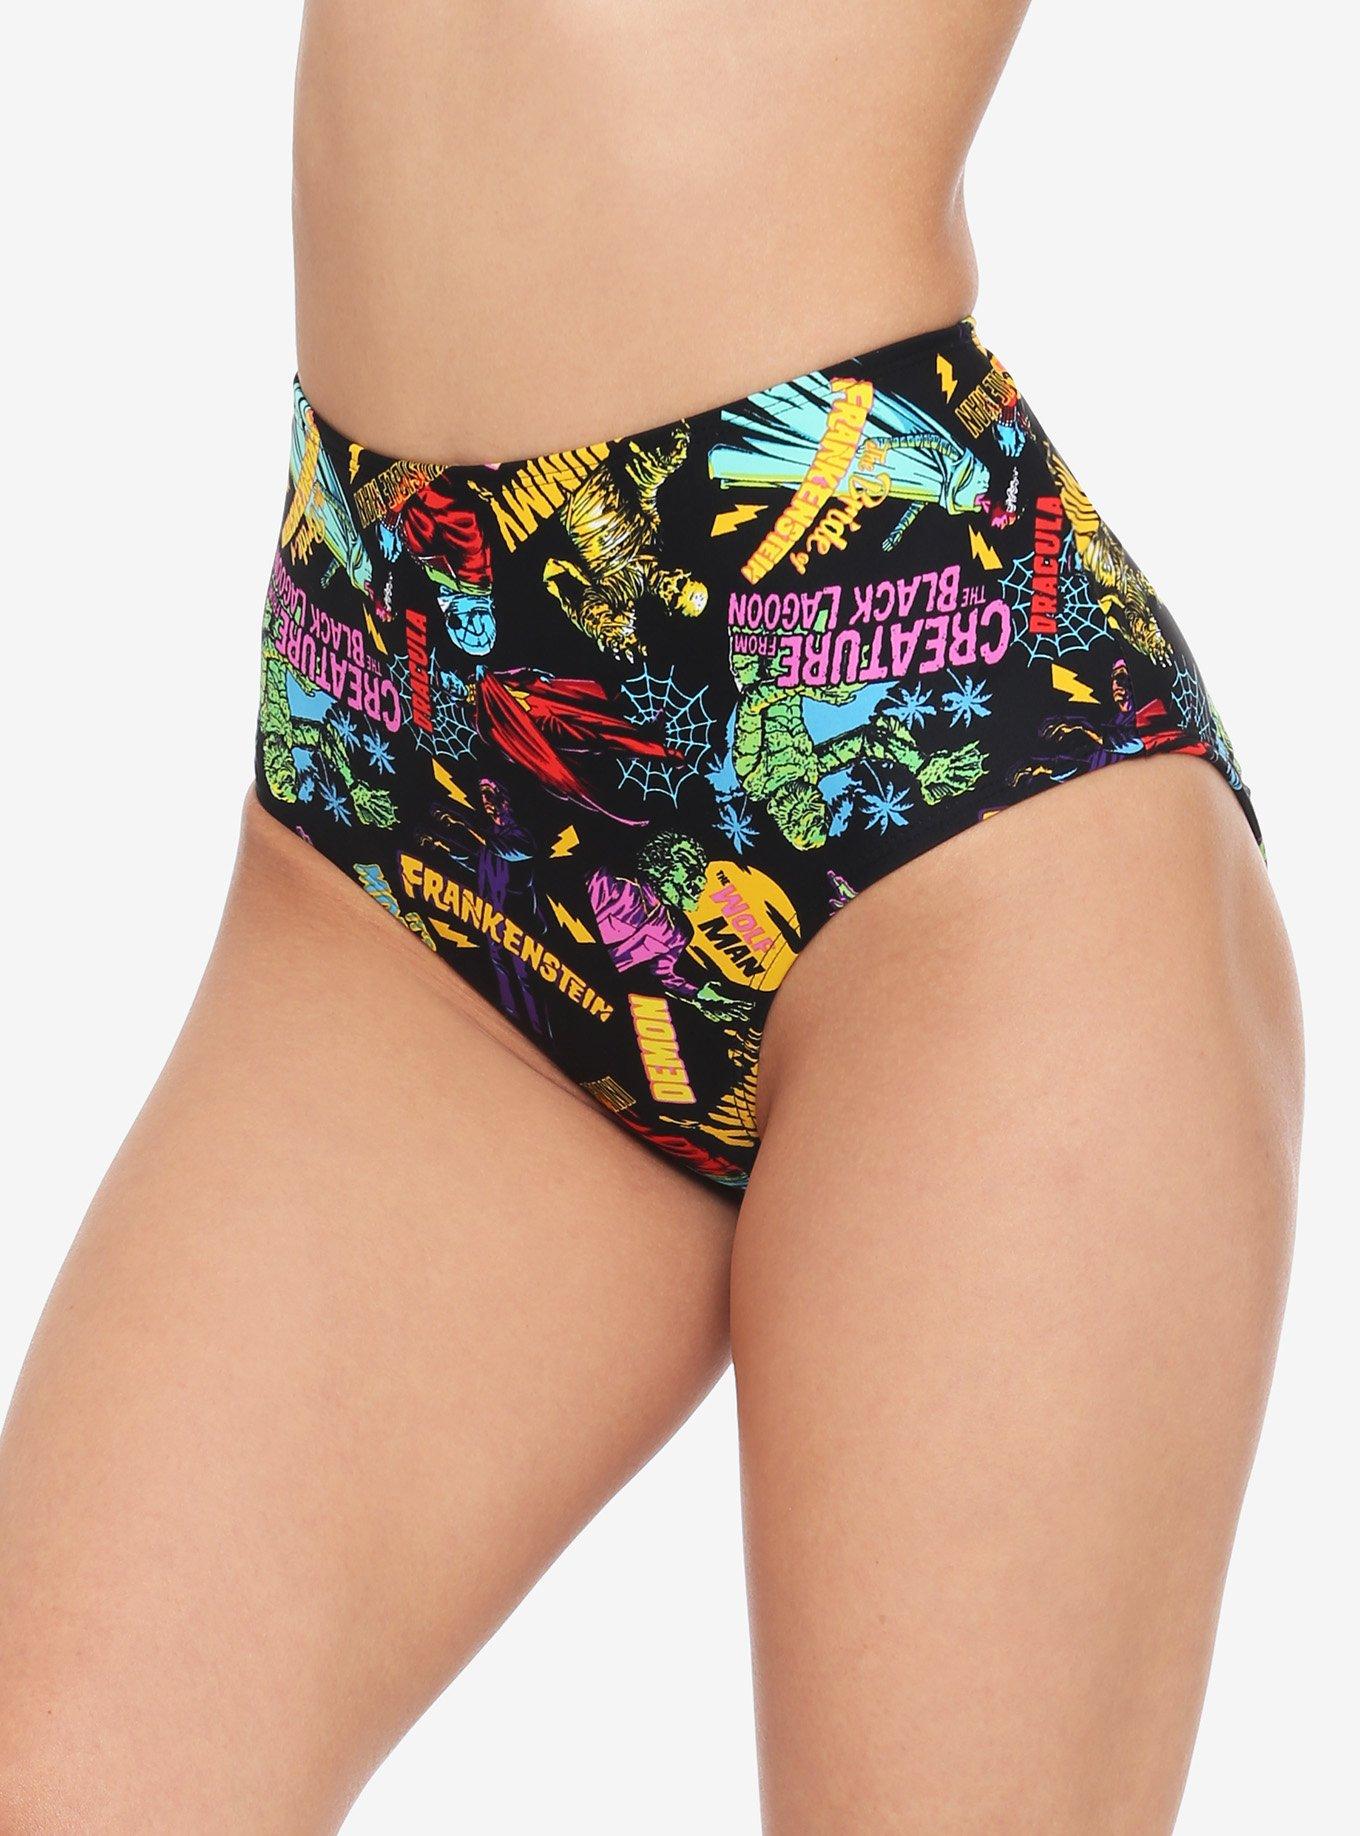 Universal Monsters High-Waisted Swim Bottoms, MULTI, hi-res